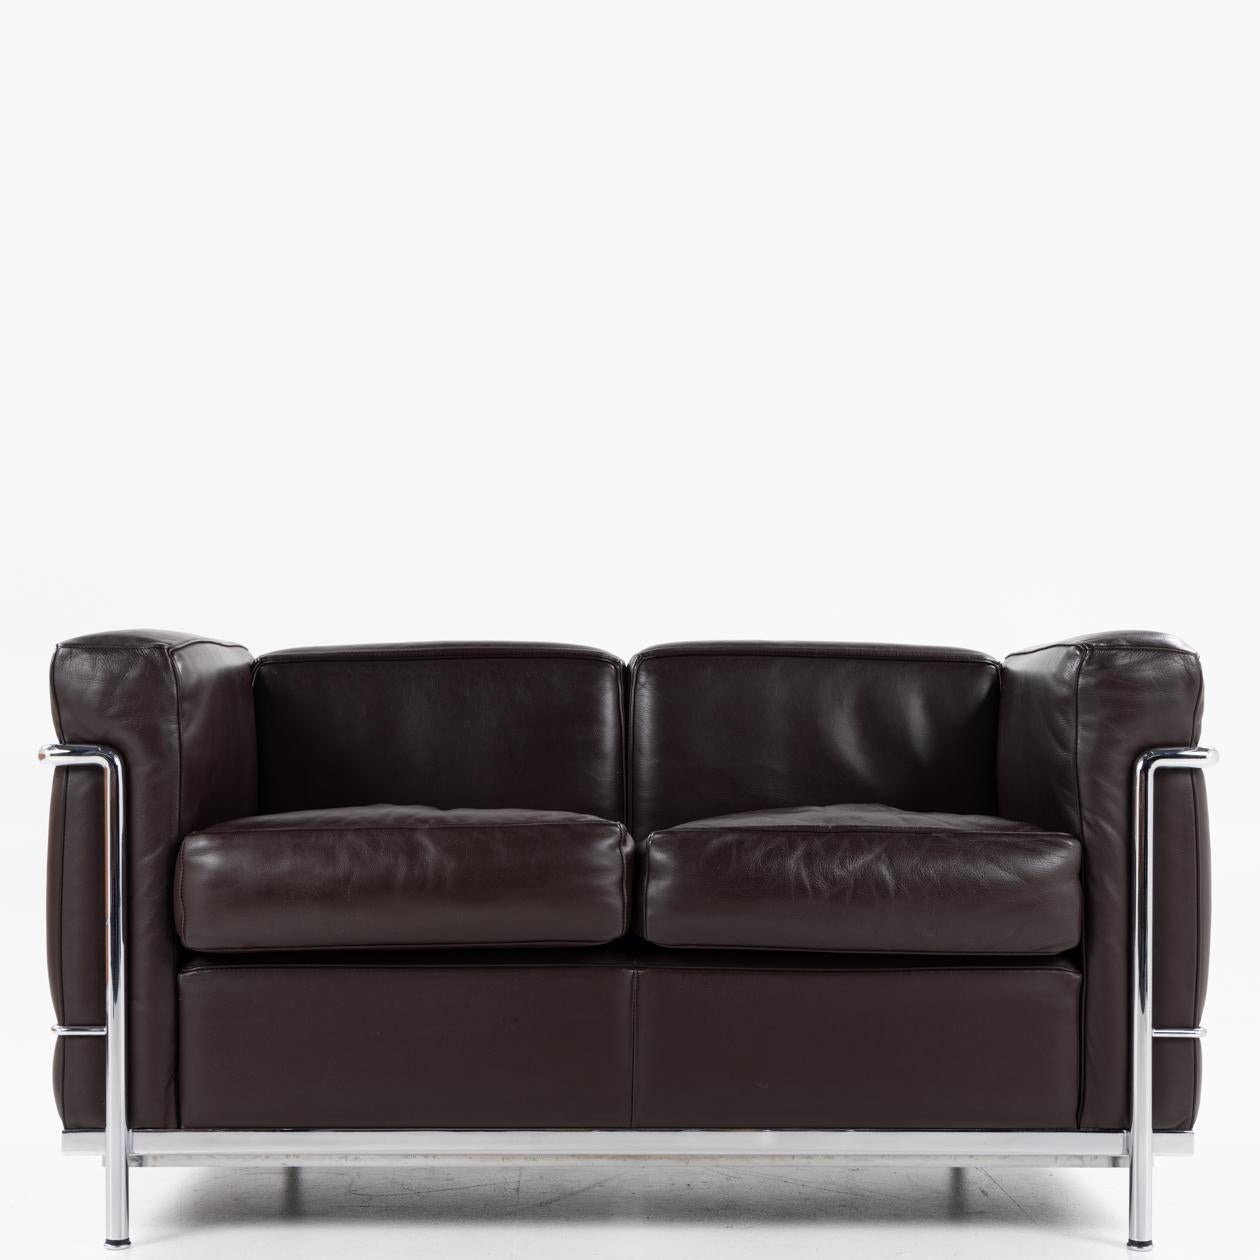 Steel LC 2 two seater sofa by Le Corbusier For Sale